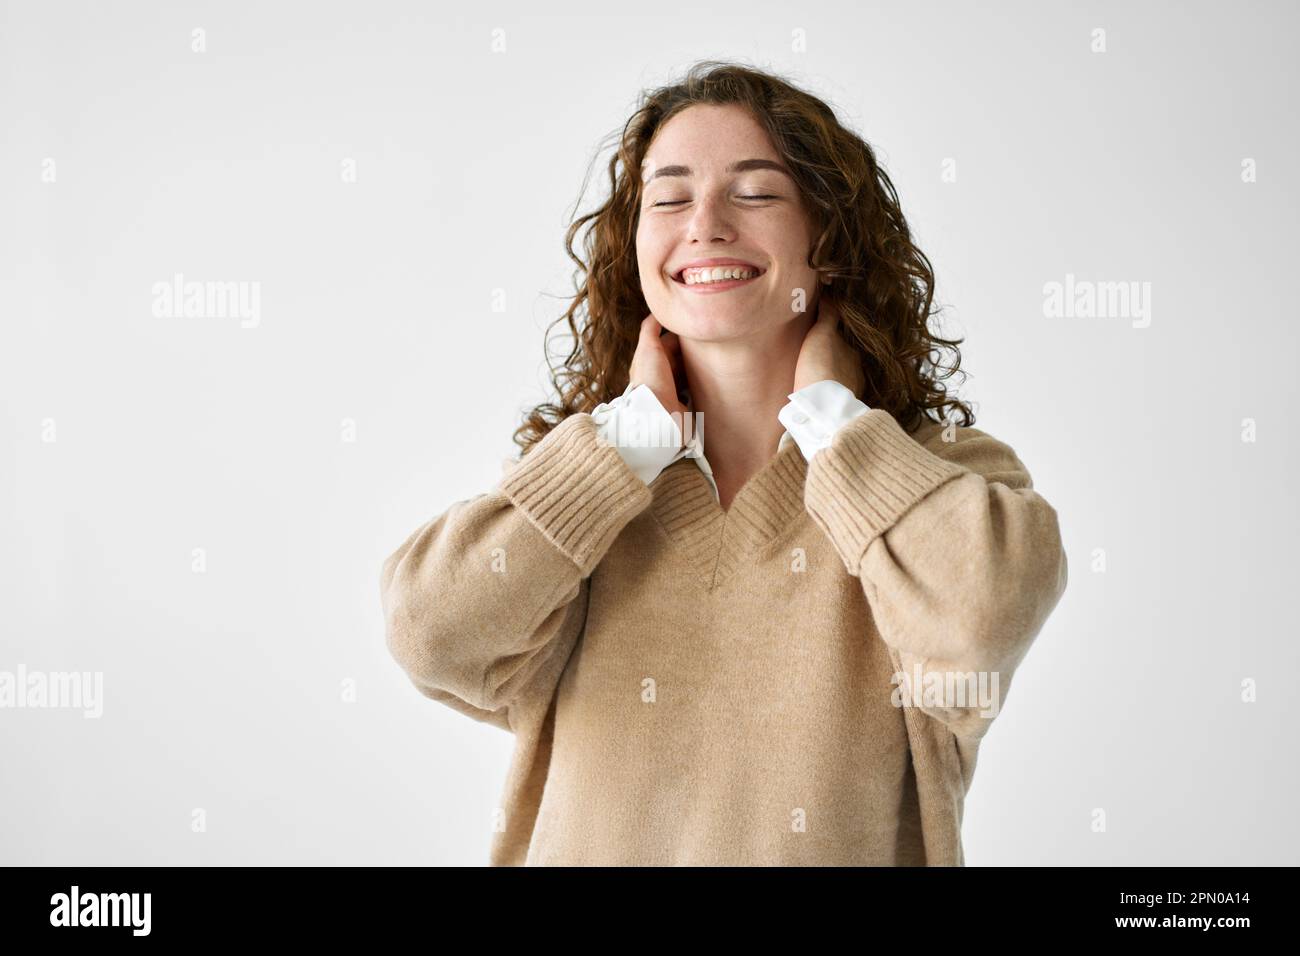 Young smiling woman laughing standing isolated at white background ...